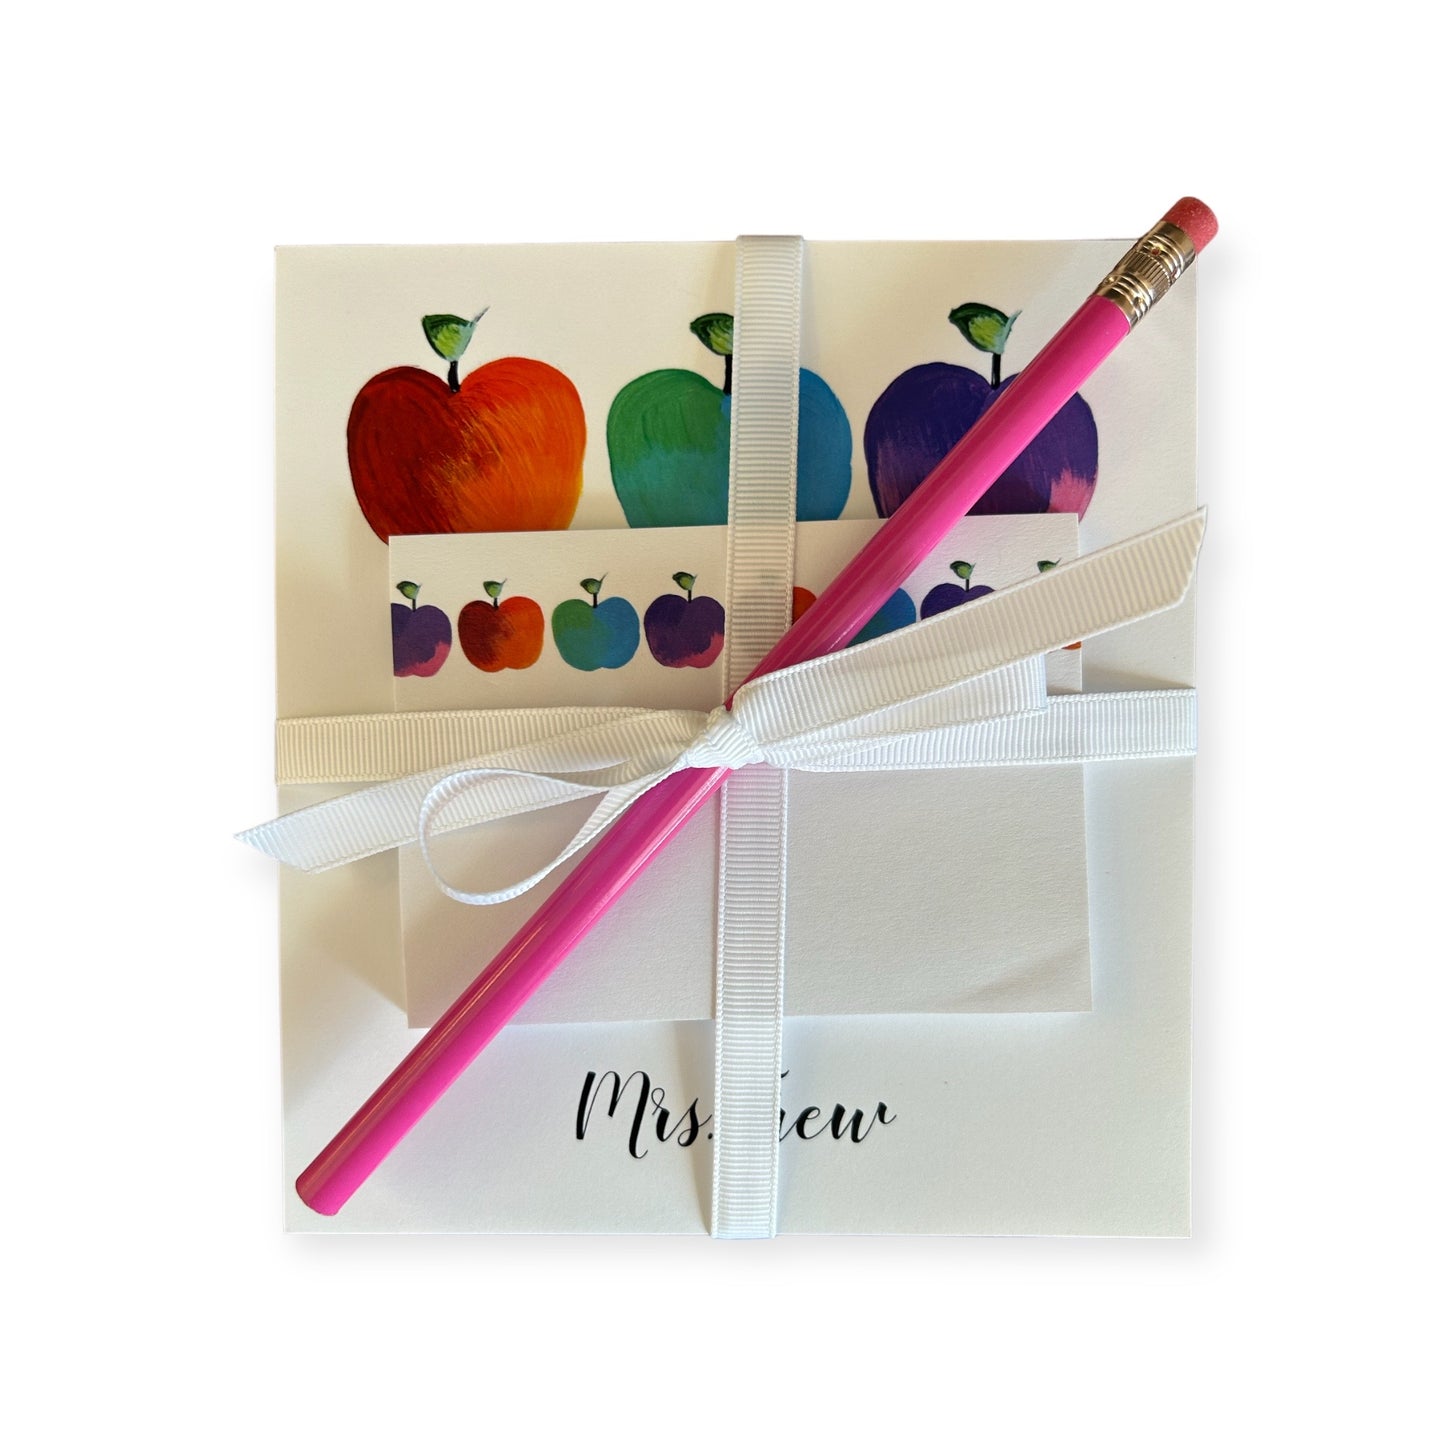 Tie Dye Apples Notepad Set | Personalized